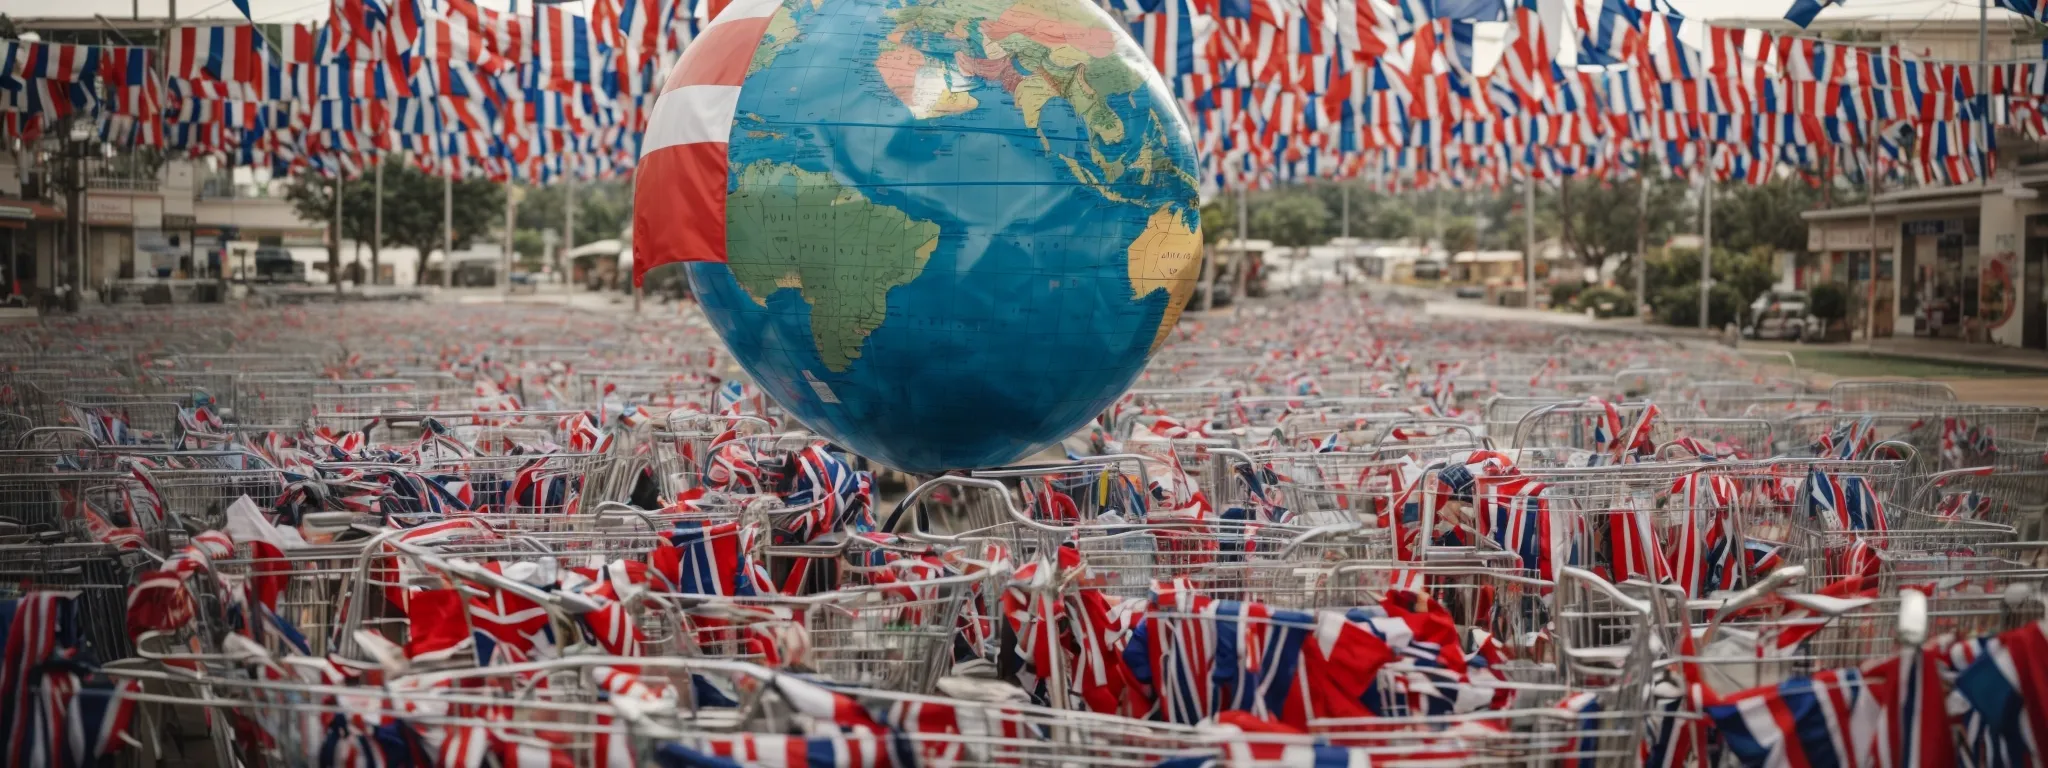 a globe surrounded by shopping carts and flags representing various countries.